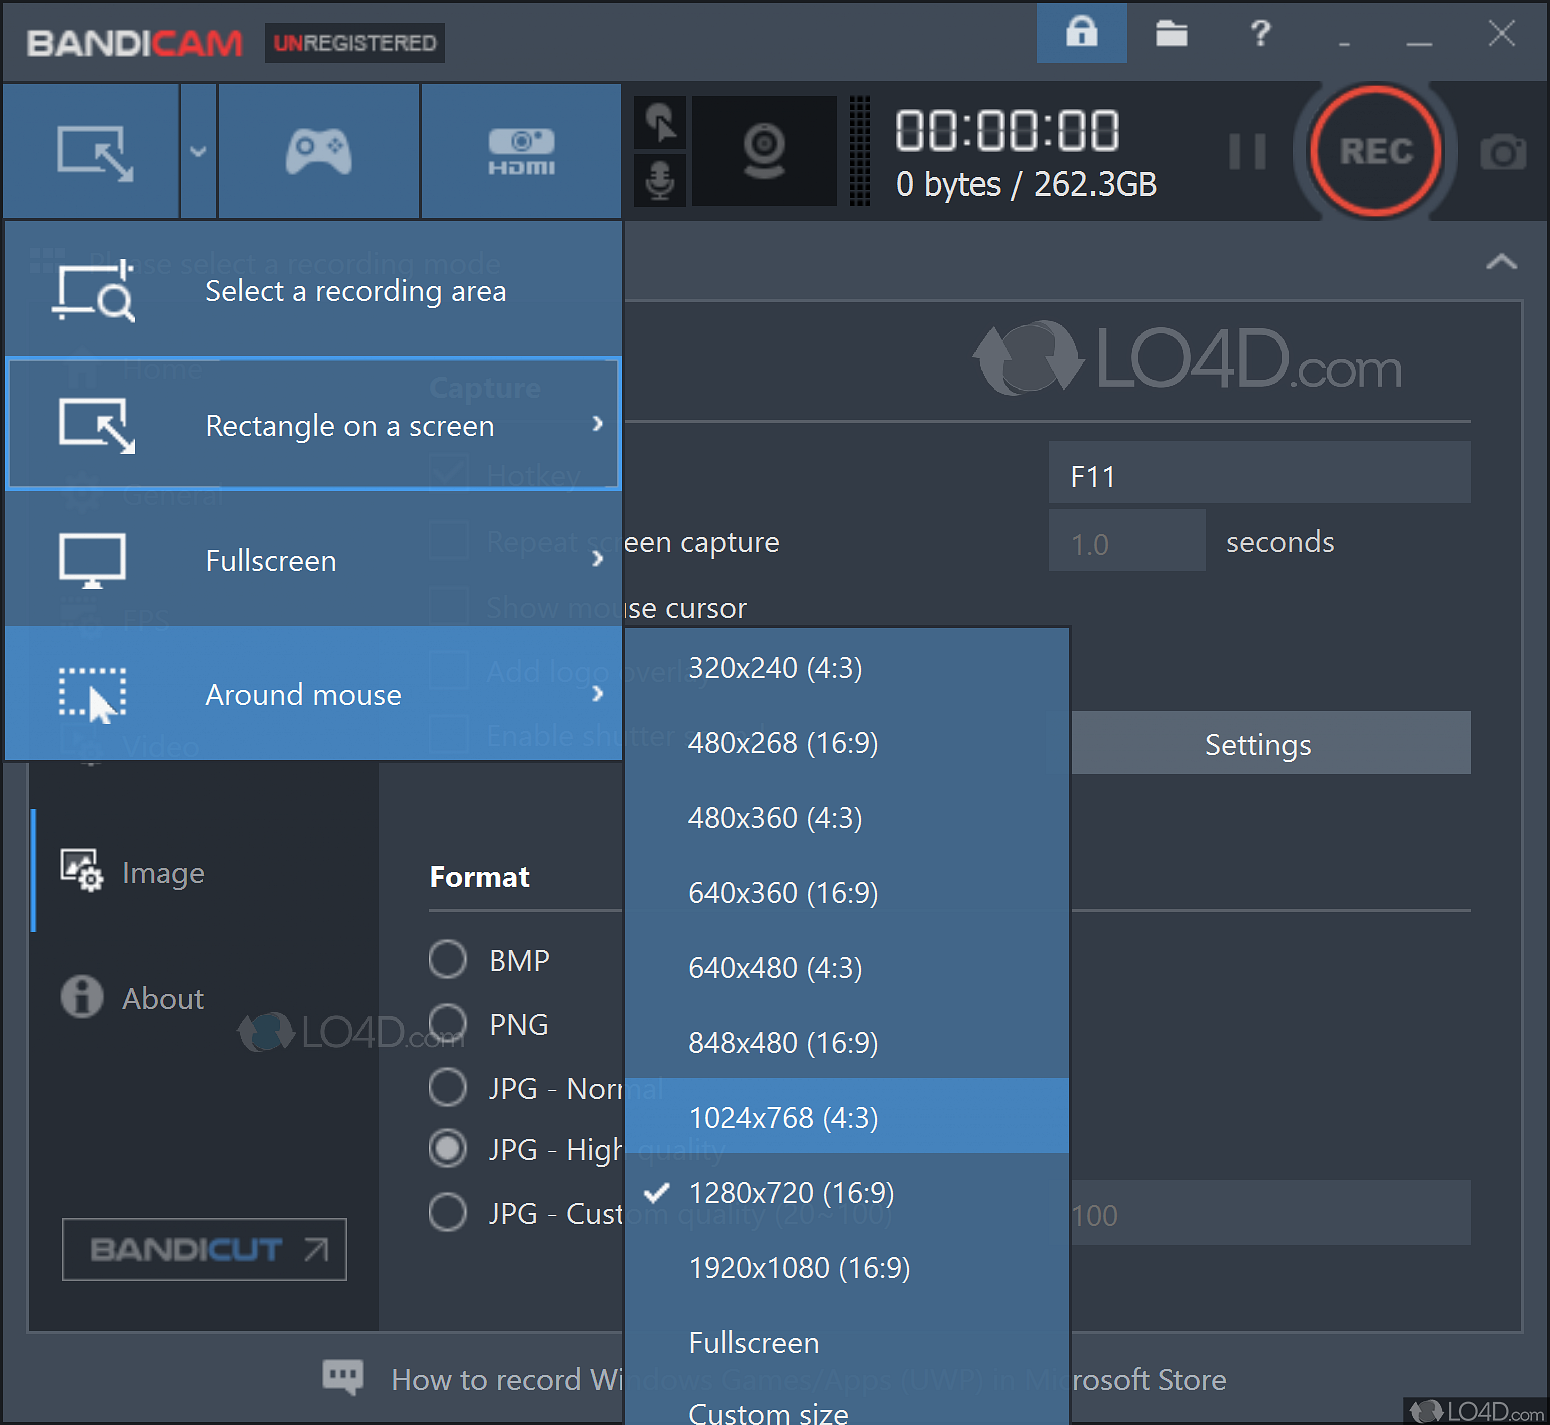 Bandicam 7.0.0.2117 for ios download free